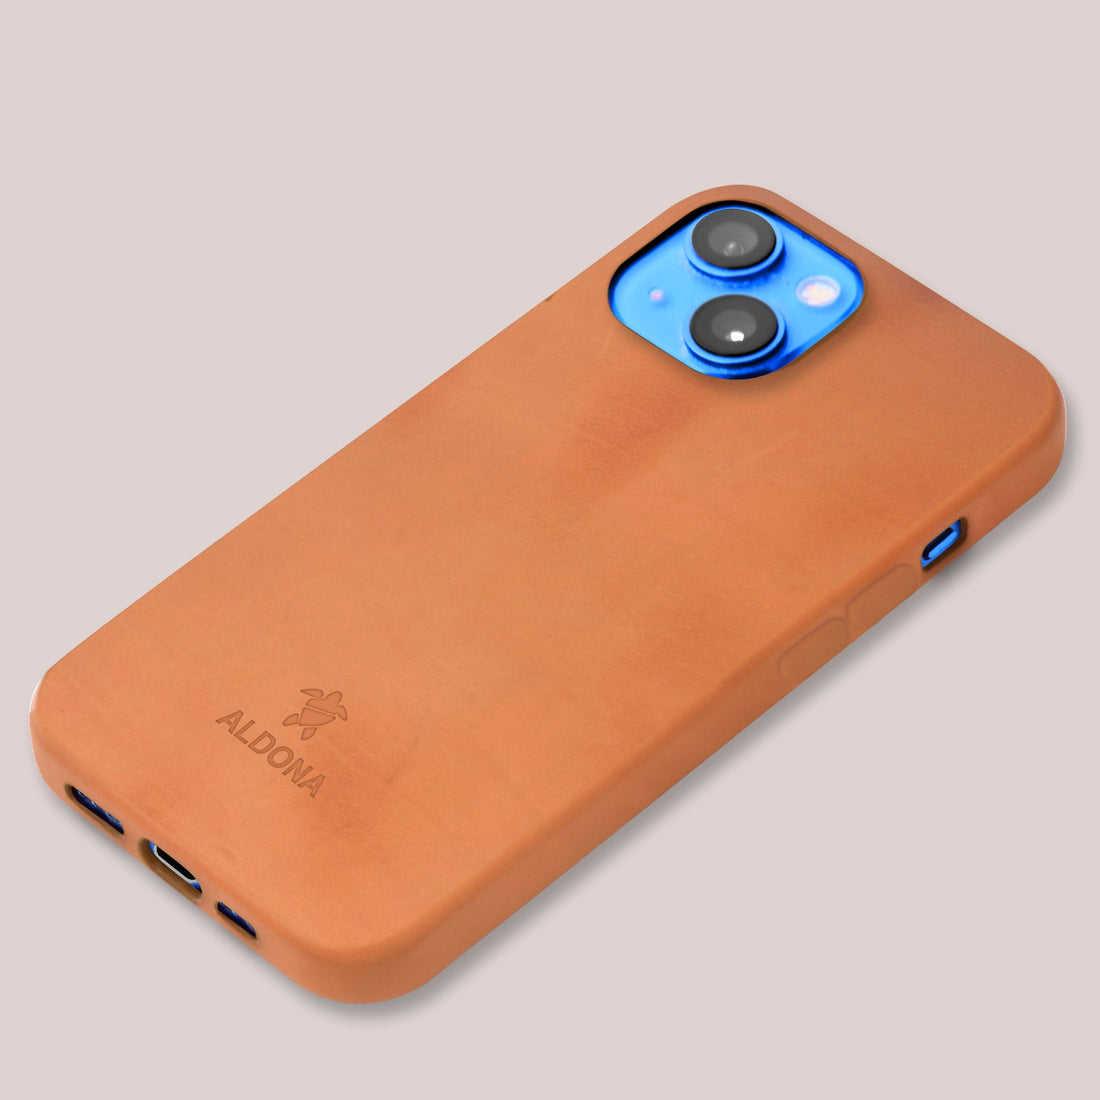 Kalon Case for iPhone 14 series with MagSafe Compatibility - Vintage Tan